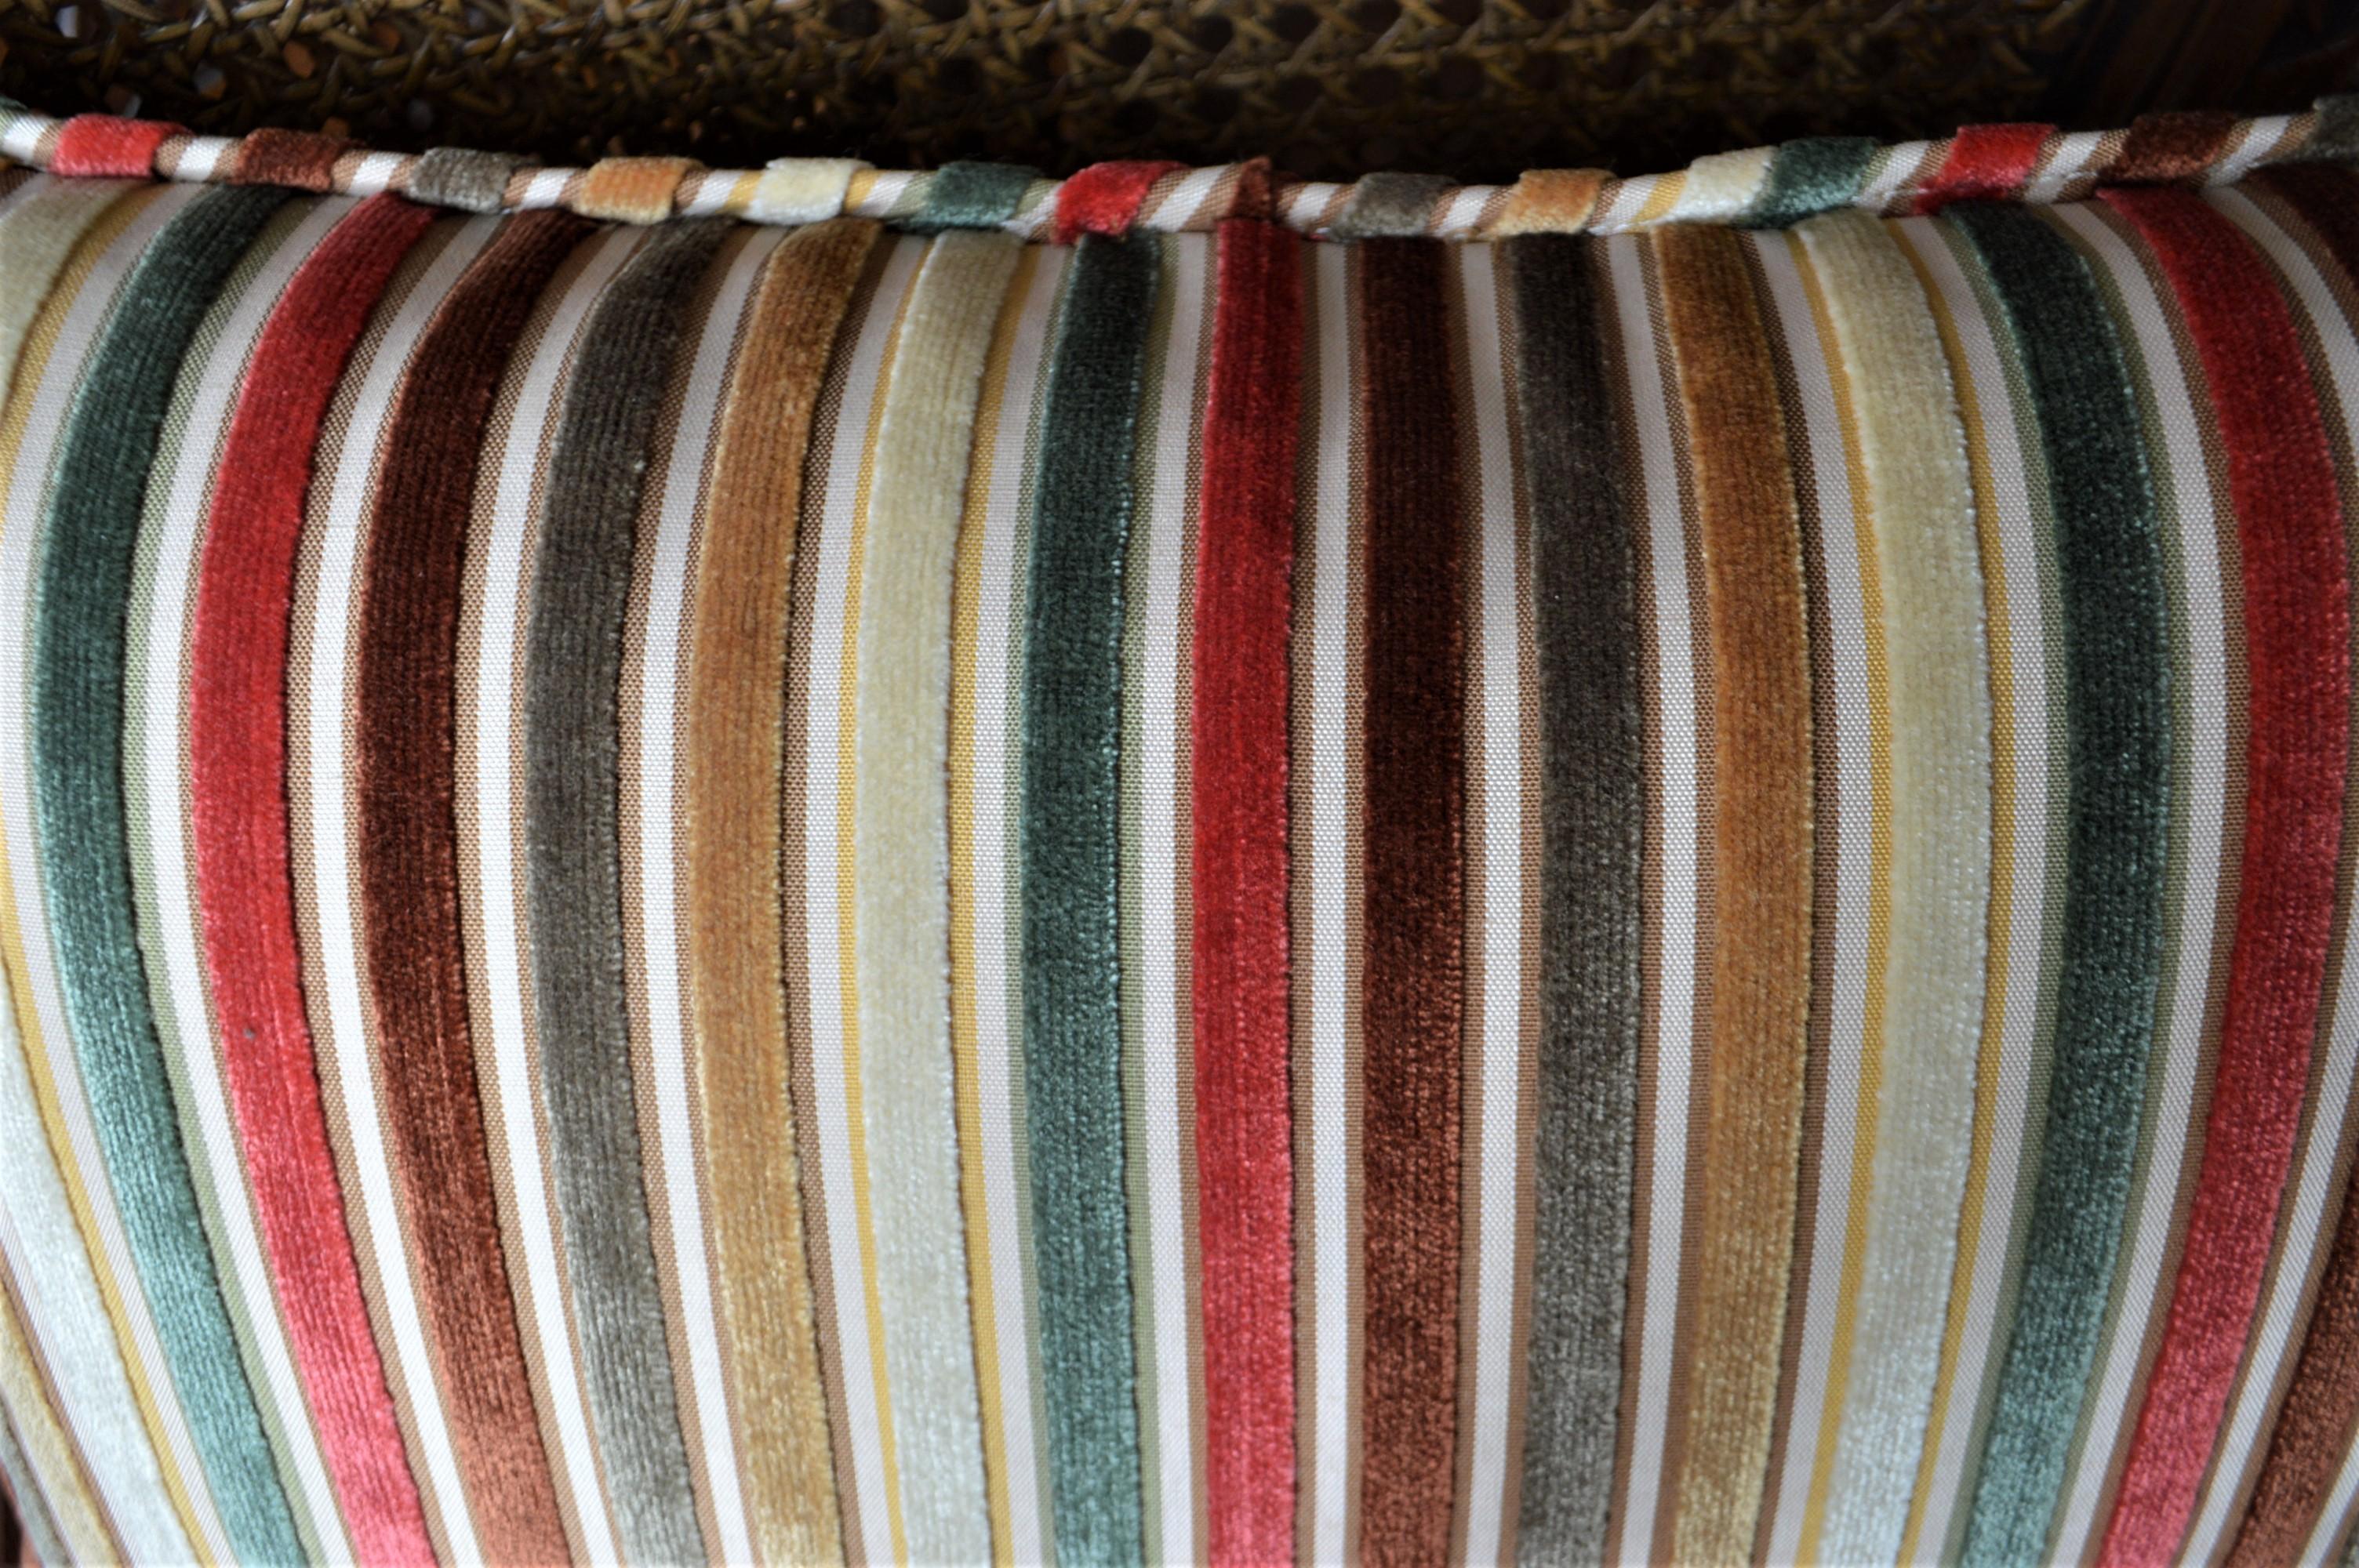 Other Pair of Lumbar Pillows, Multi Color Cut Velvet Stripe French Fabric